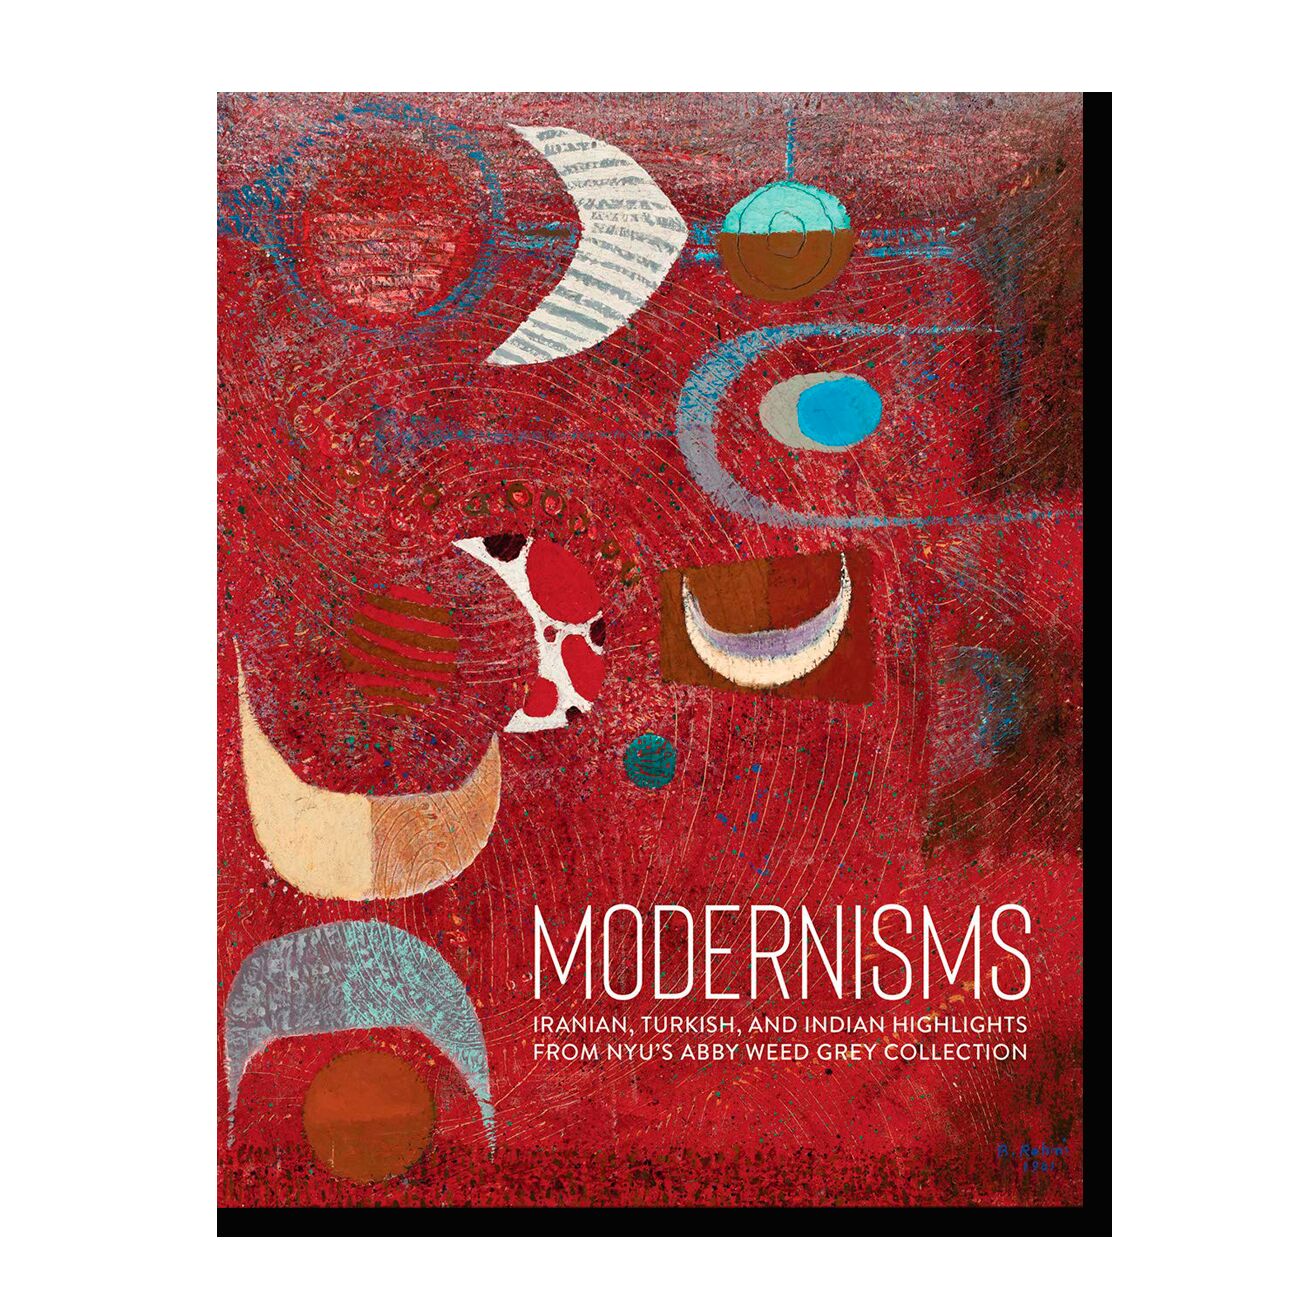 Modernisms: Iranian, Turkish, and Indian Highlights from NYU’s Abby Weed Grey Collection